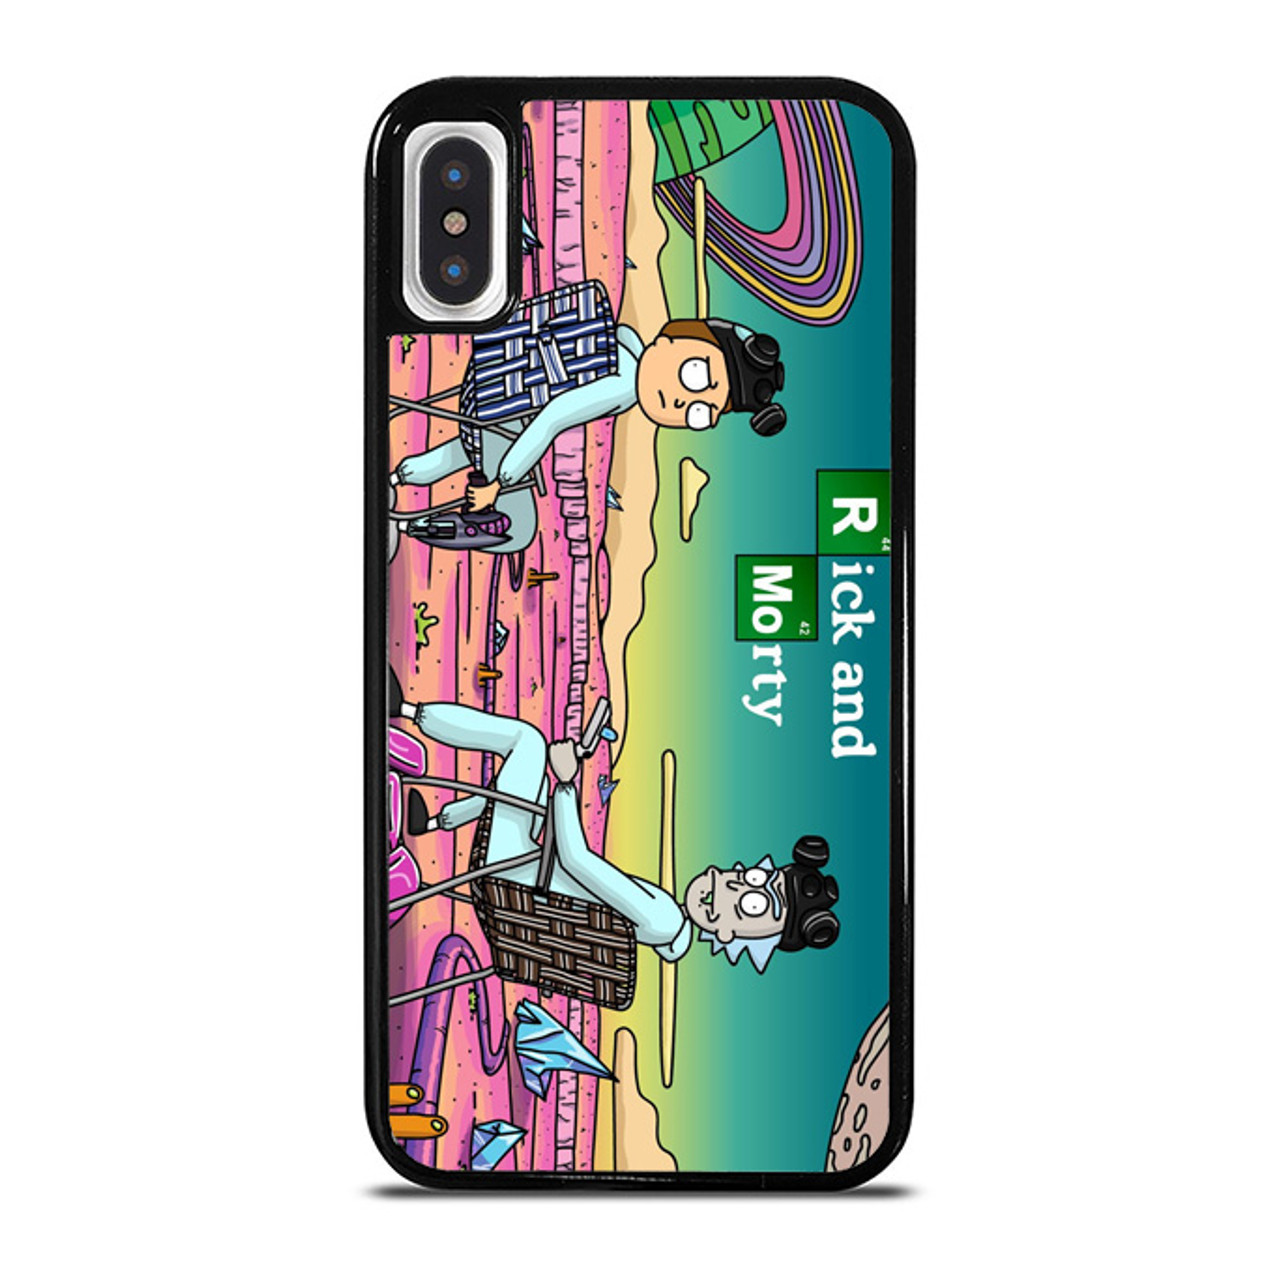 Rick and Morty Hypebeast iPhone 11 Pro Max Case - CASESHUNTER